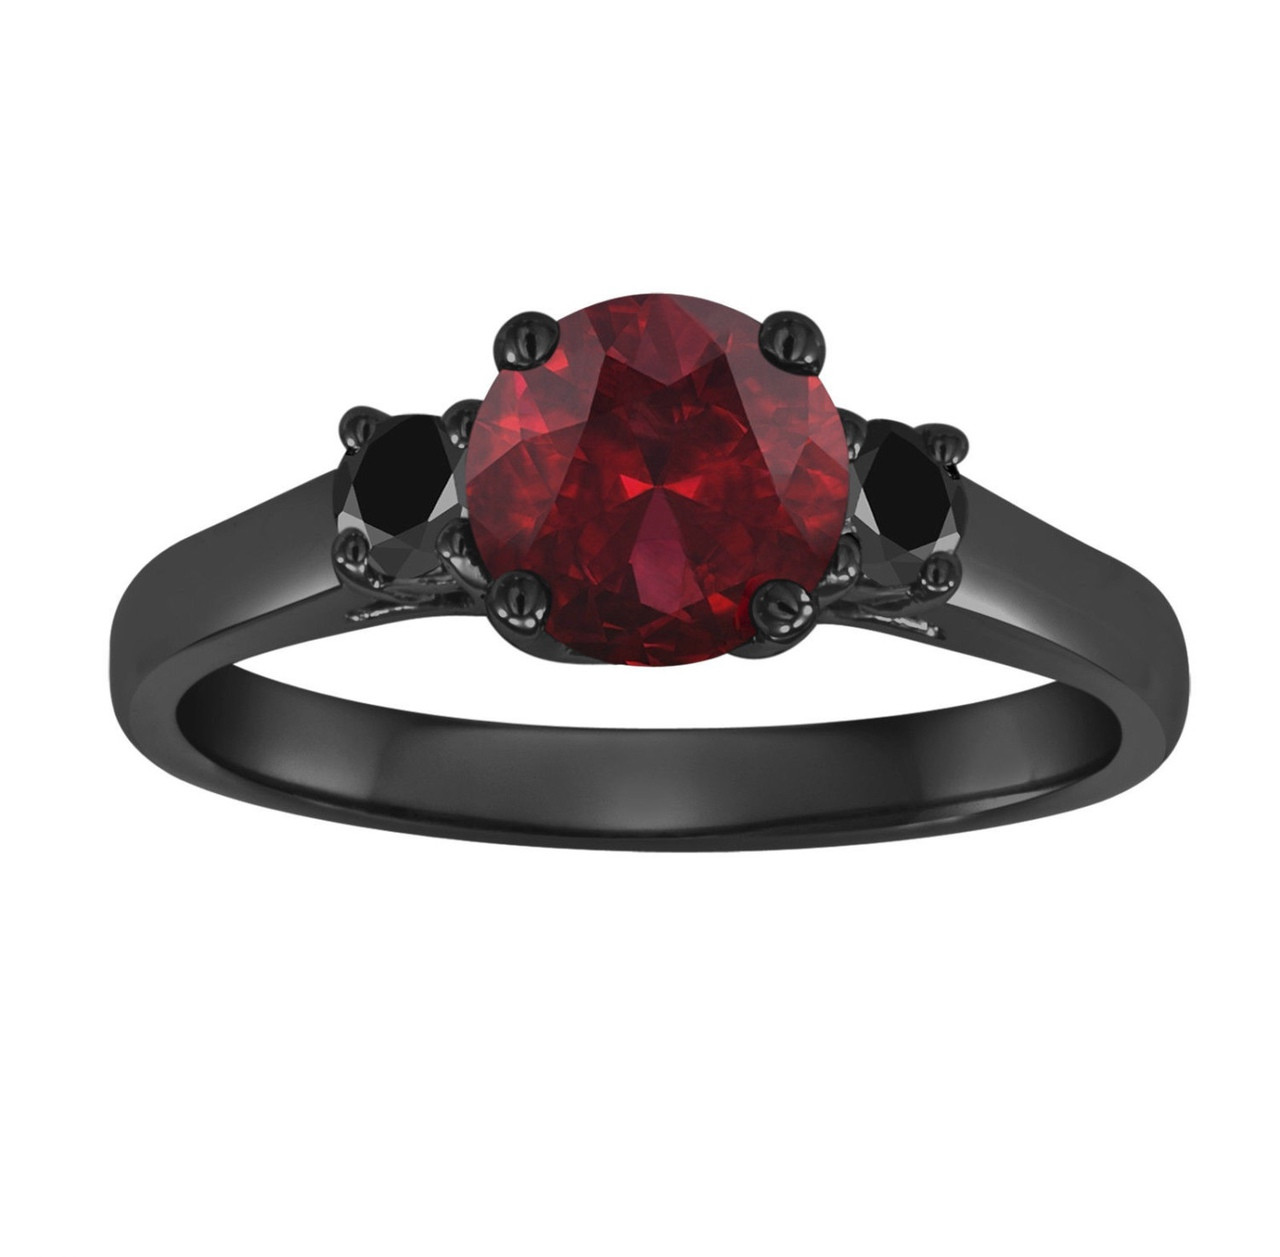 6.74ct Imperial Zircon and Garnet Ring in 18k Yellow Gold - Moriartys Gem  Art